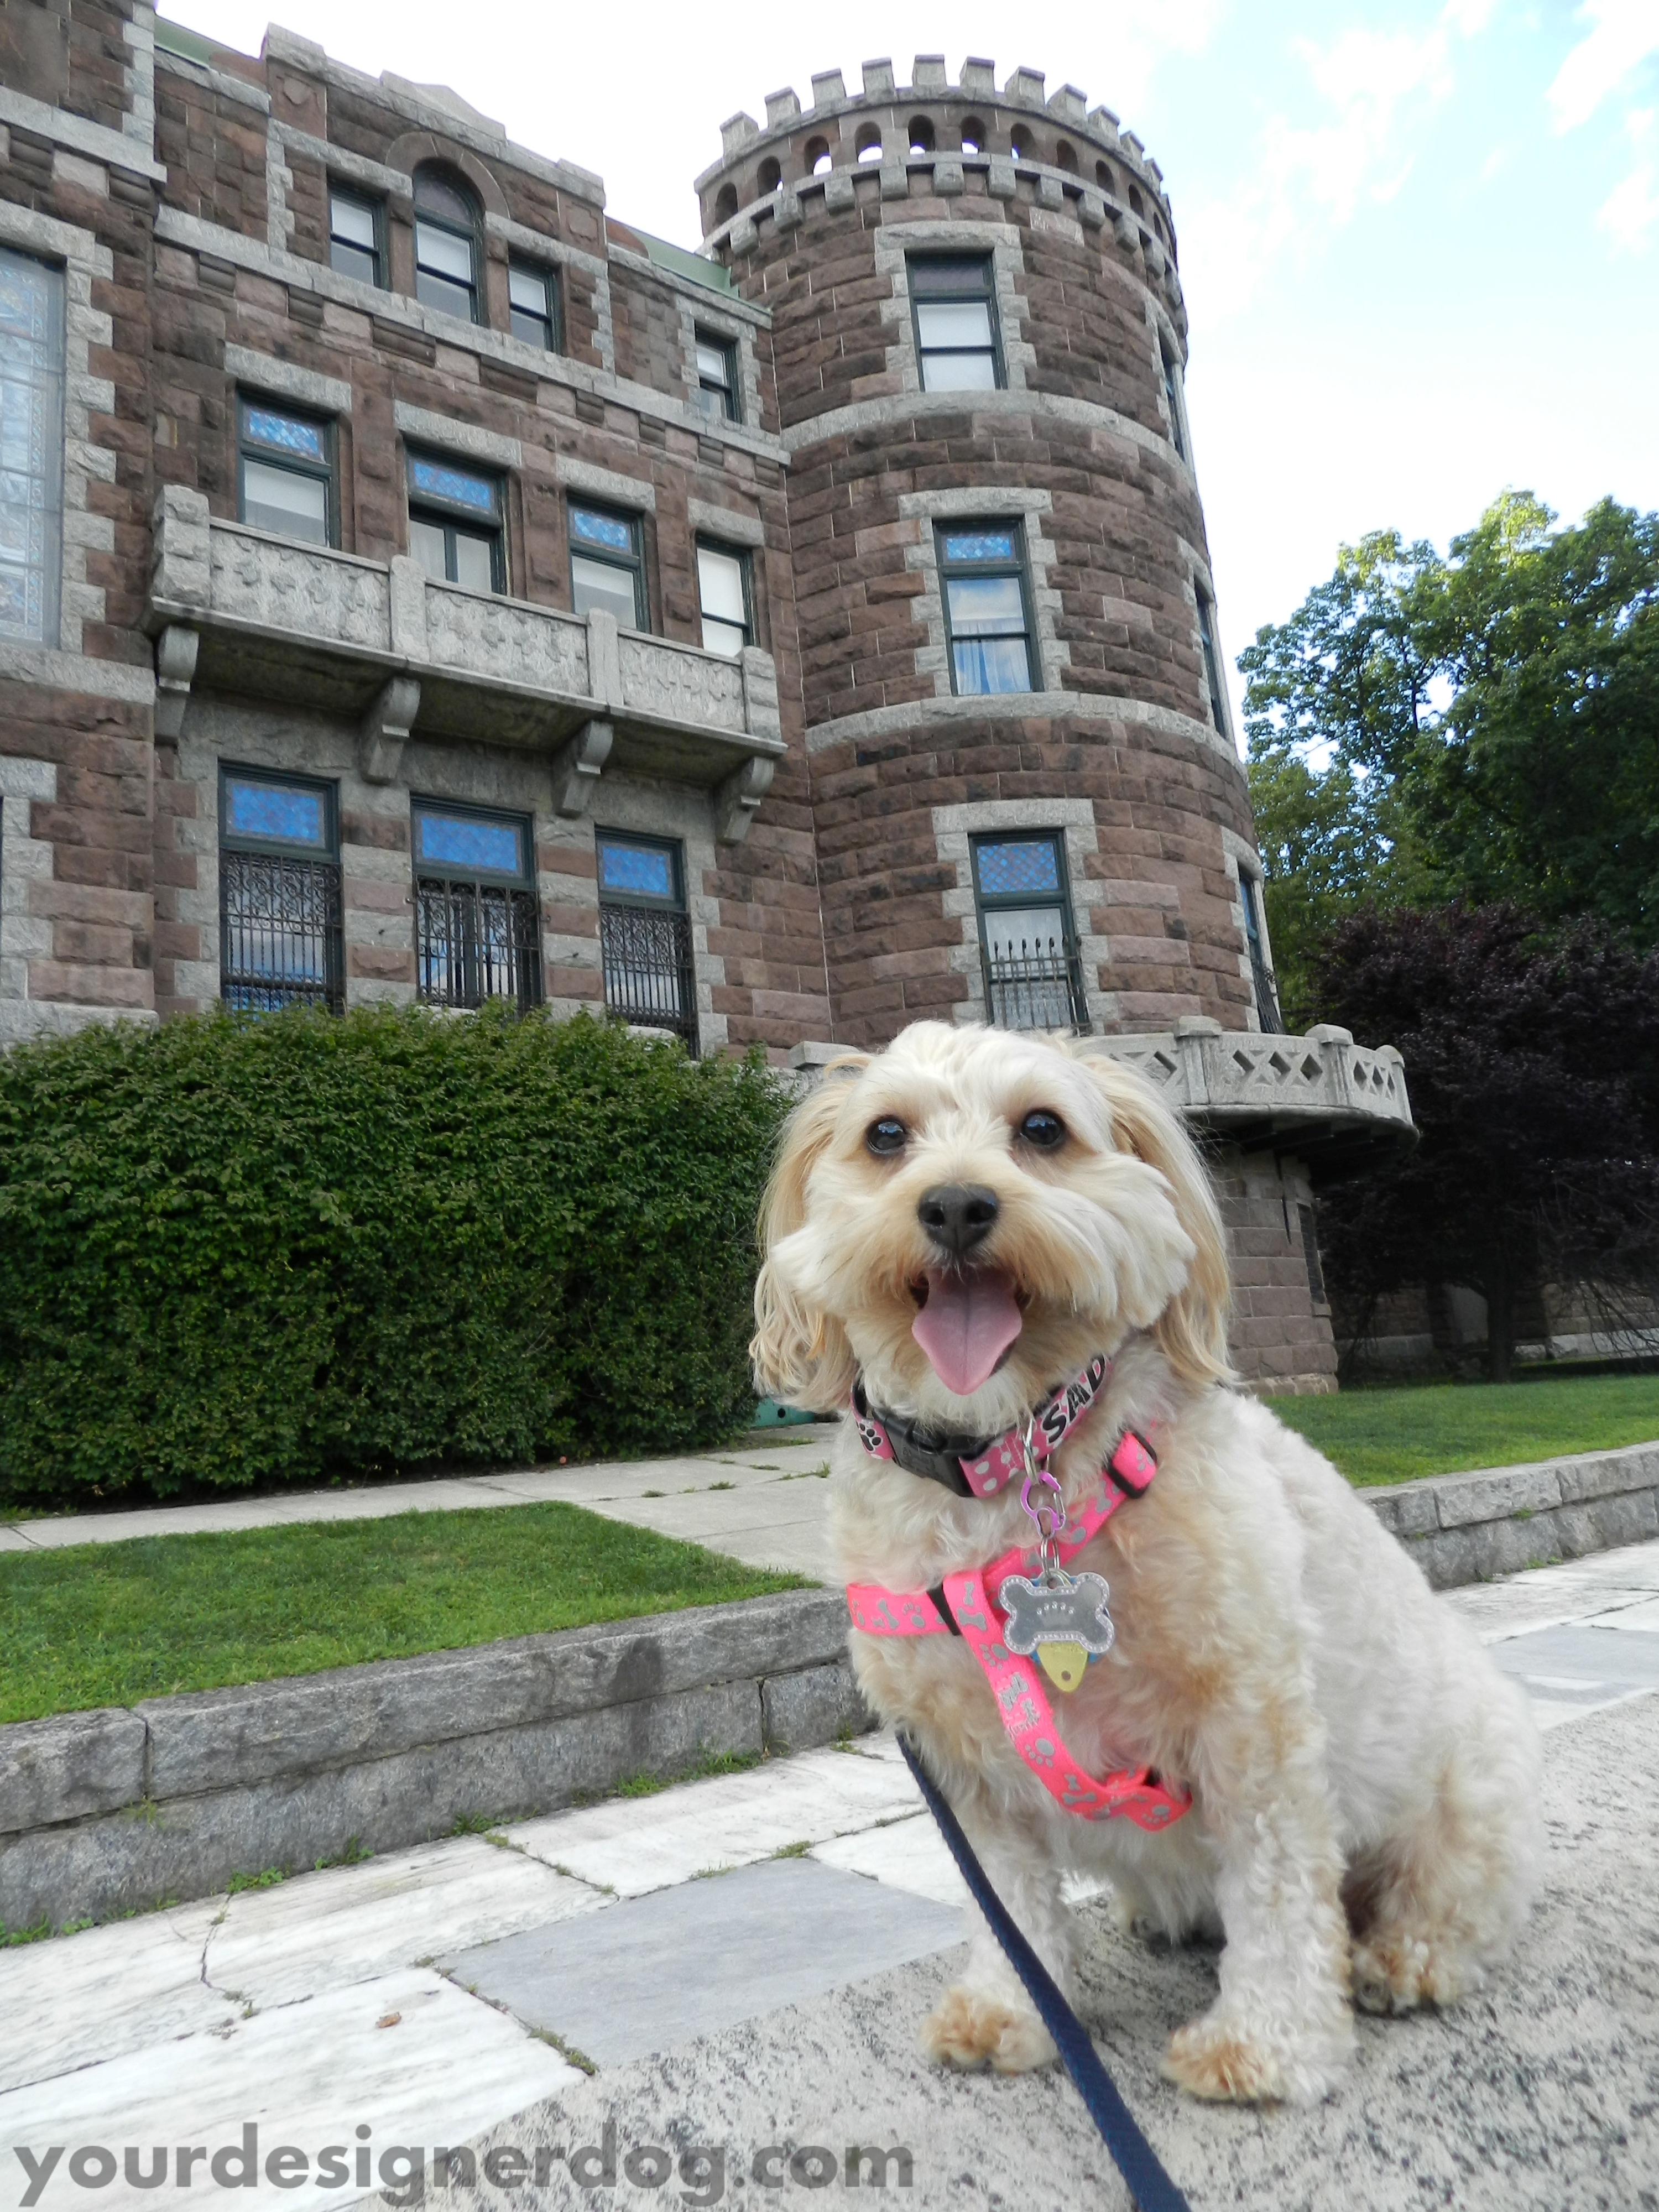 dogs, designer dogs, guard dog, yorkipoo, yorkie poo, castle, historic home